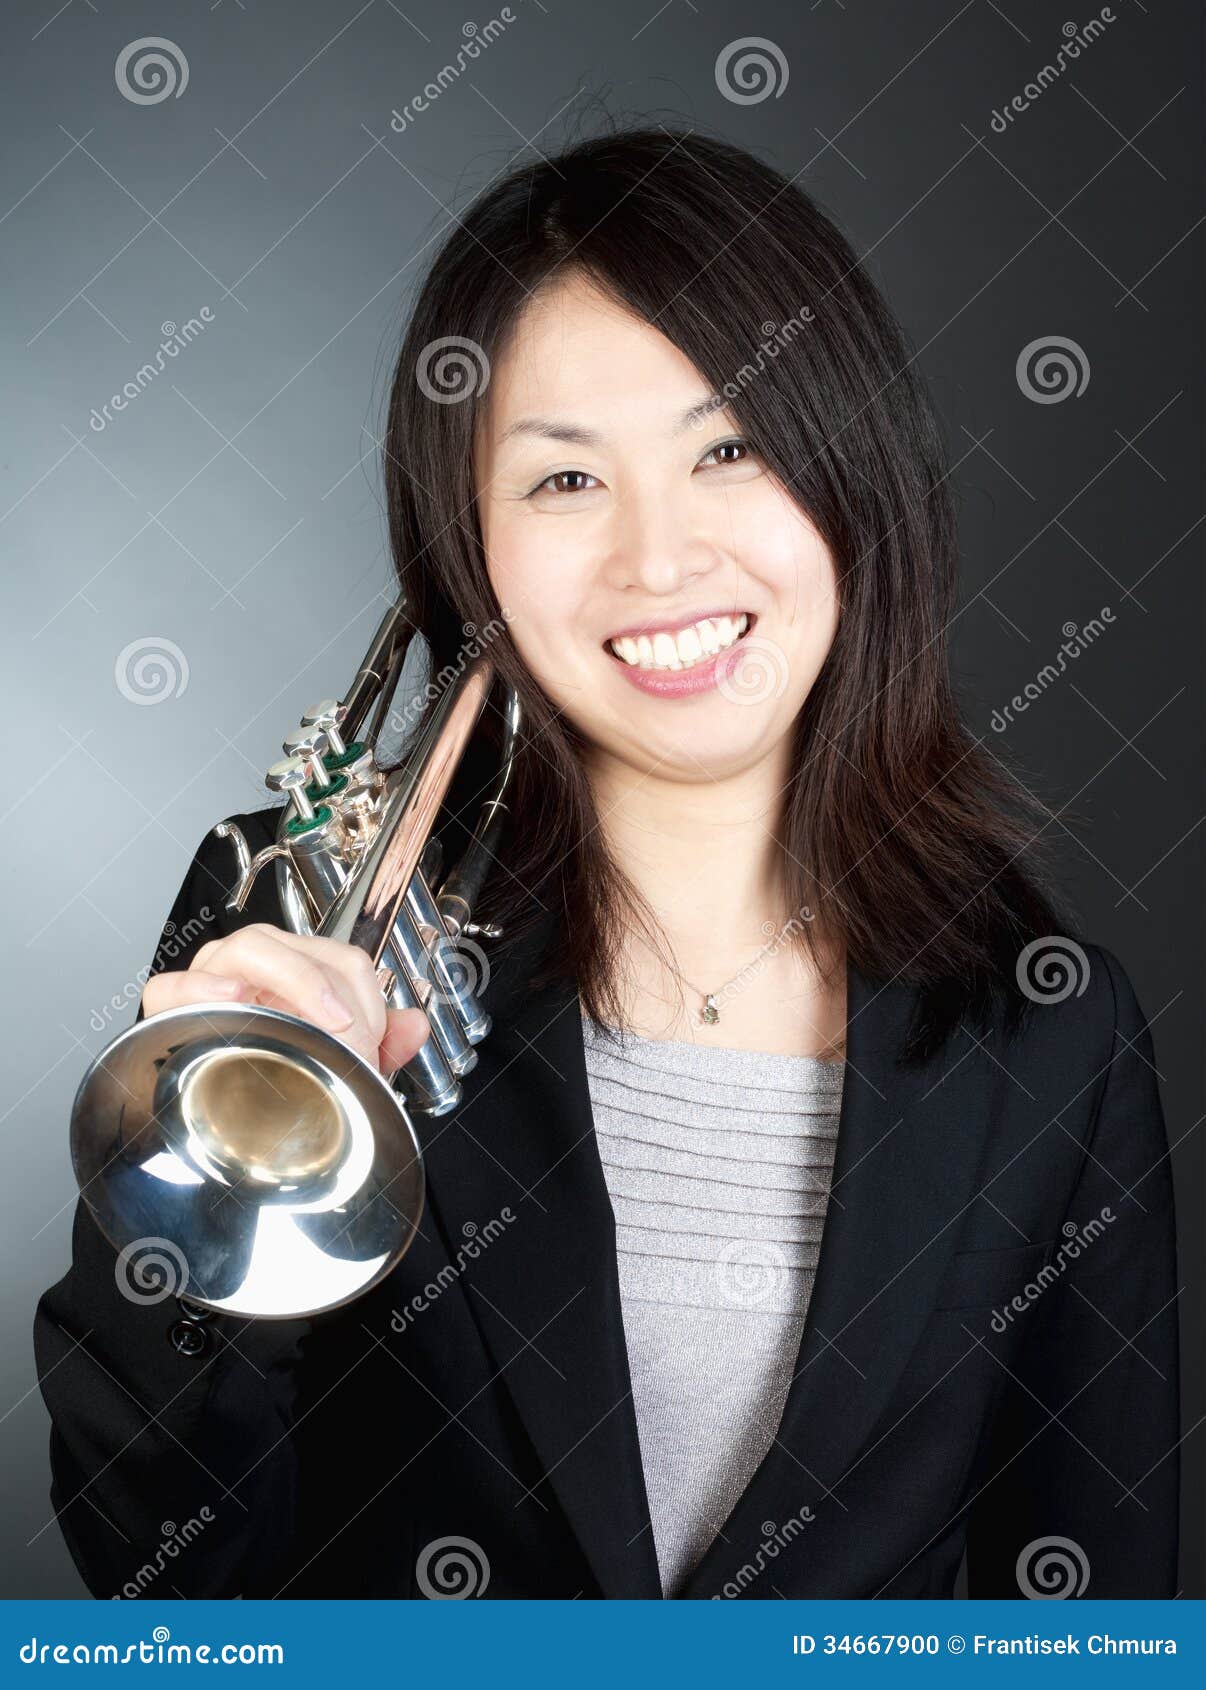 Portrait Of A Female Trumpet Player Stock Photo Image Brass.